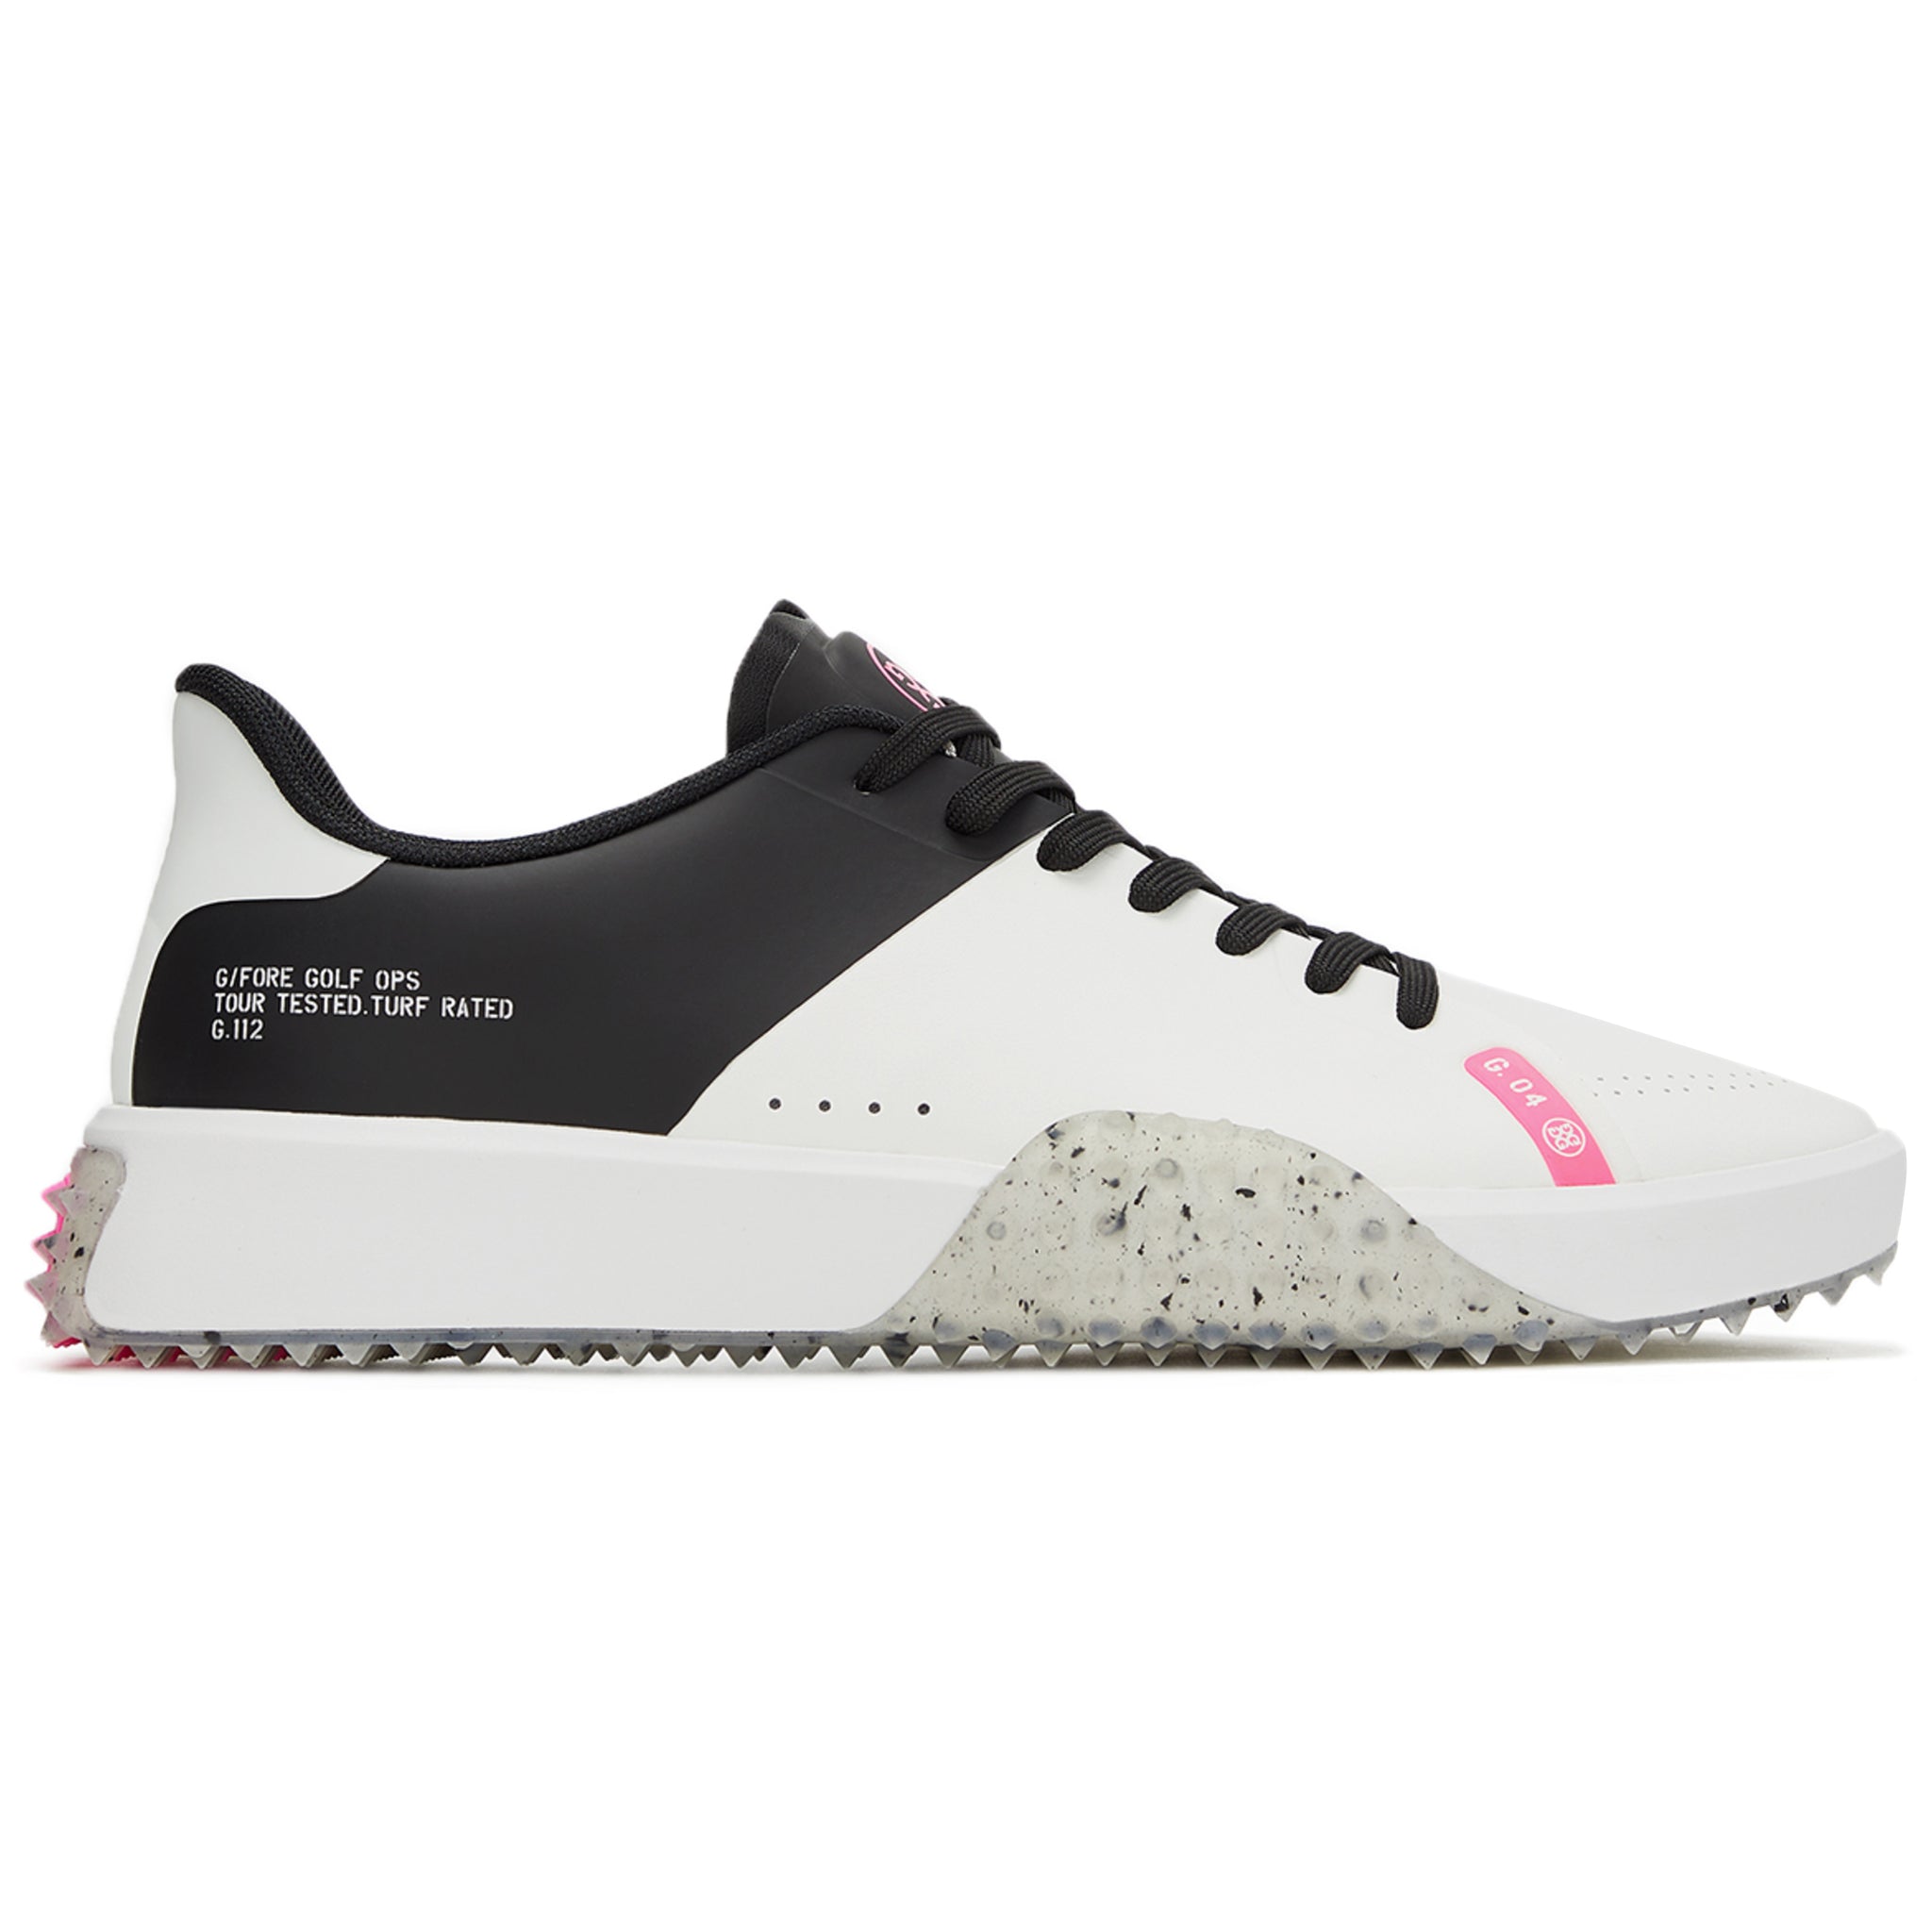 g-fore-g-122-golf-shoes-gmf000025-snow-onyx